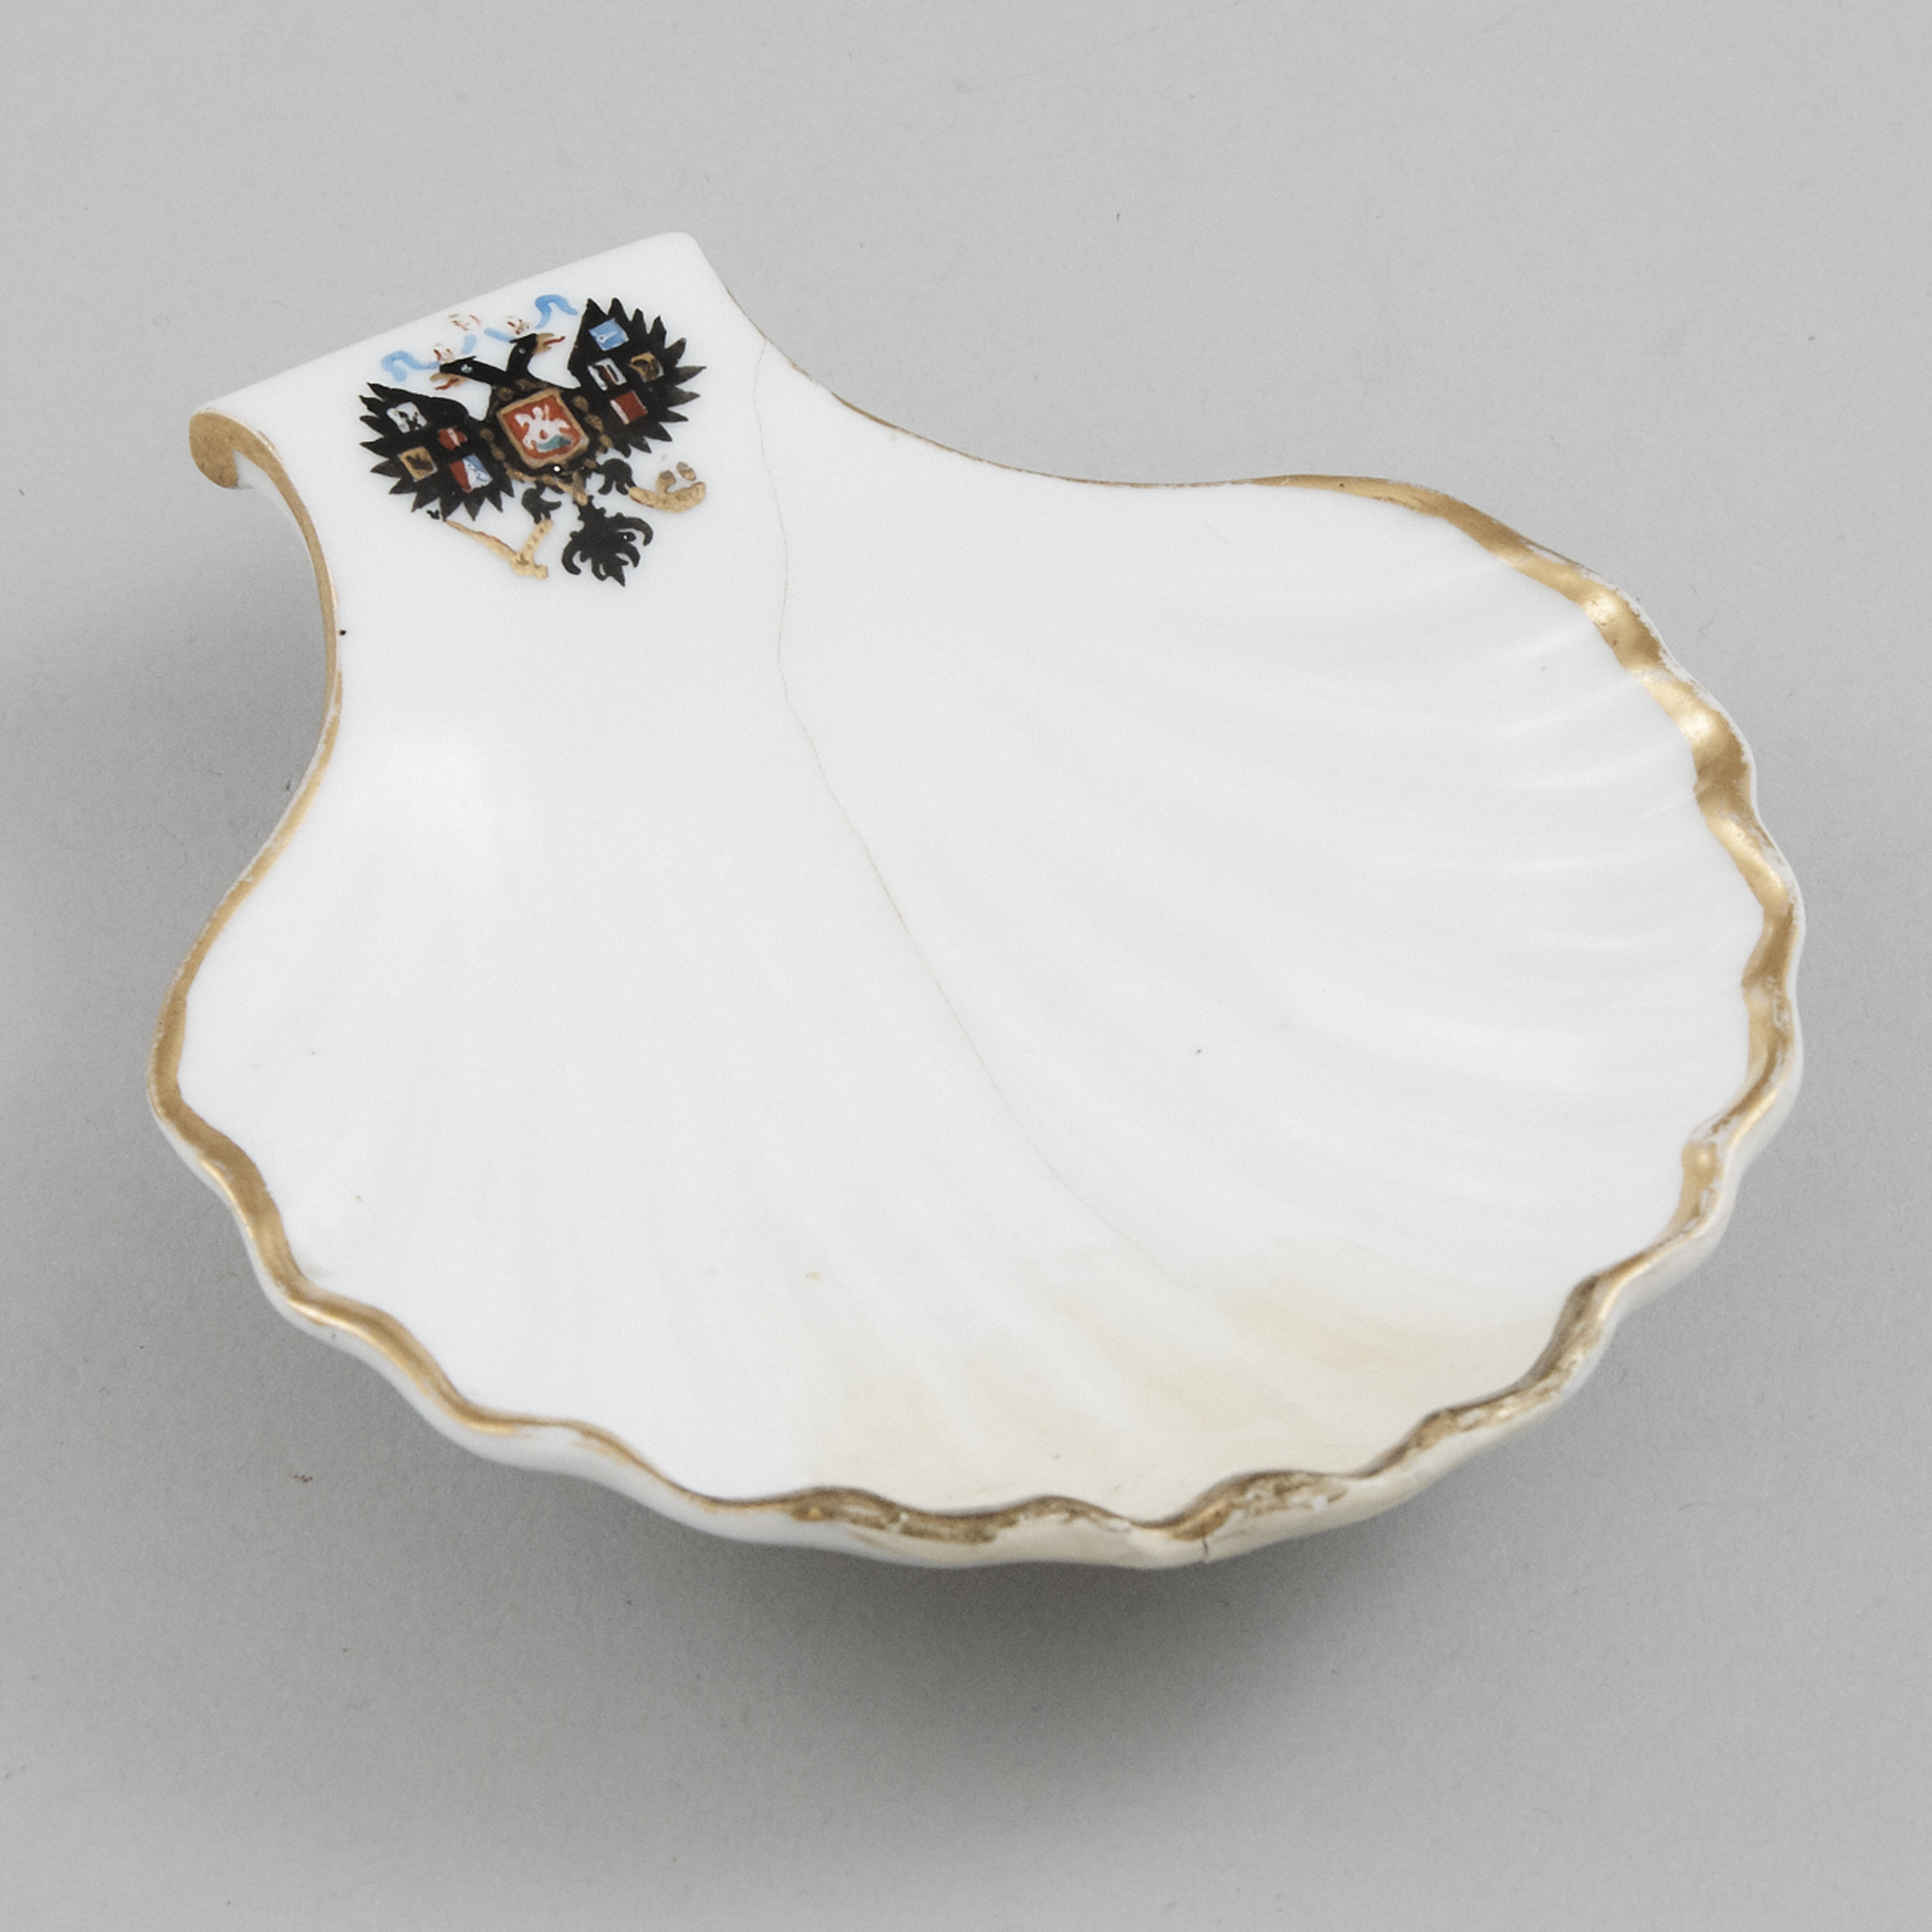 Russian Imperial Porcelain Shell Dish, from the Coronation Service, period of Alexander III (1881-94)